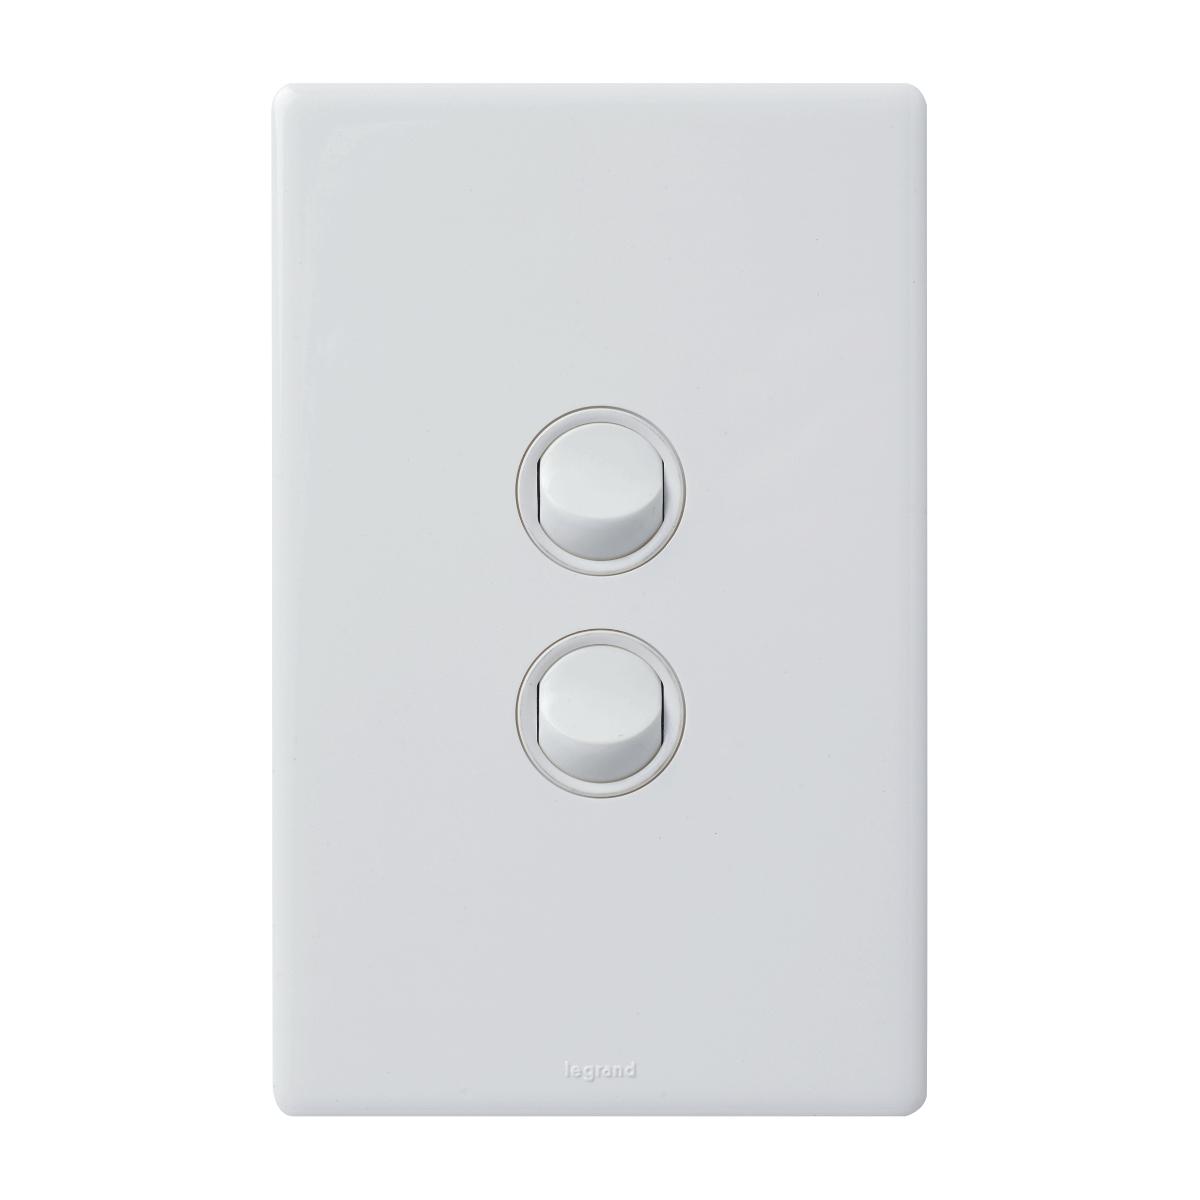 EXCEL E-DED 16A 2G SWITCH WHITE